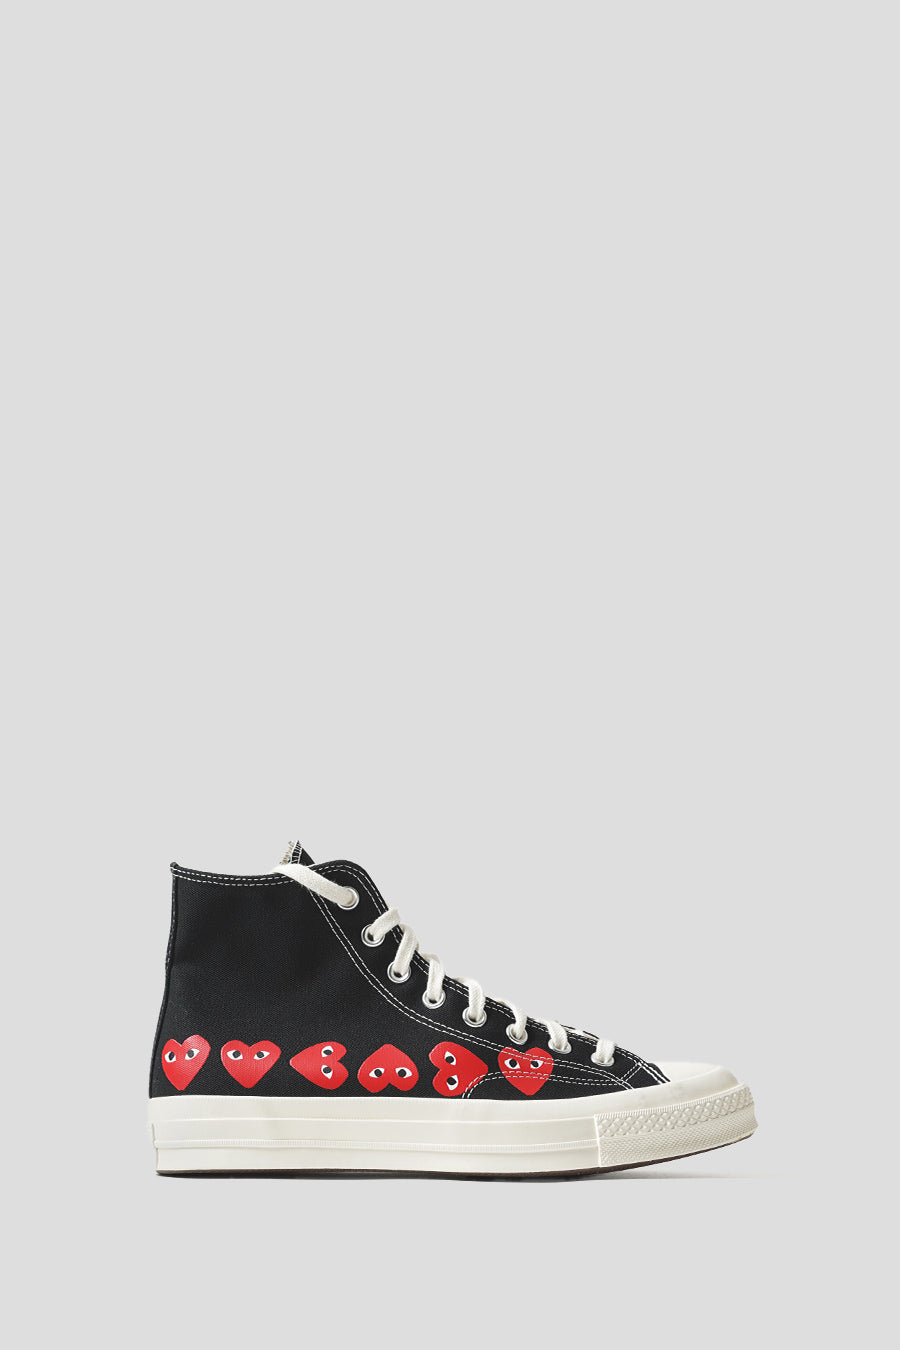 Comme des garçons PLAY - HIGH CT70 MULTI HEART BLACK, HIGH RISK RED AND EGRET SNEAKERS - LE LABO STORE